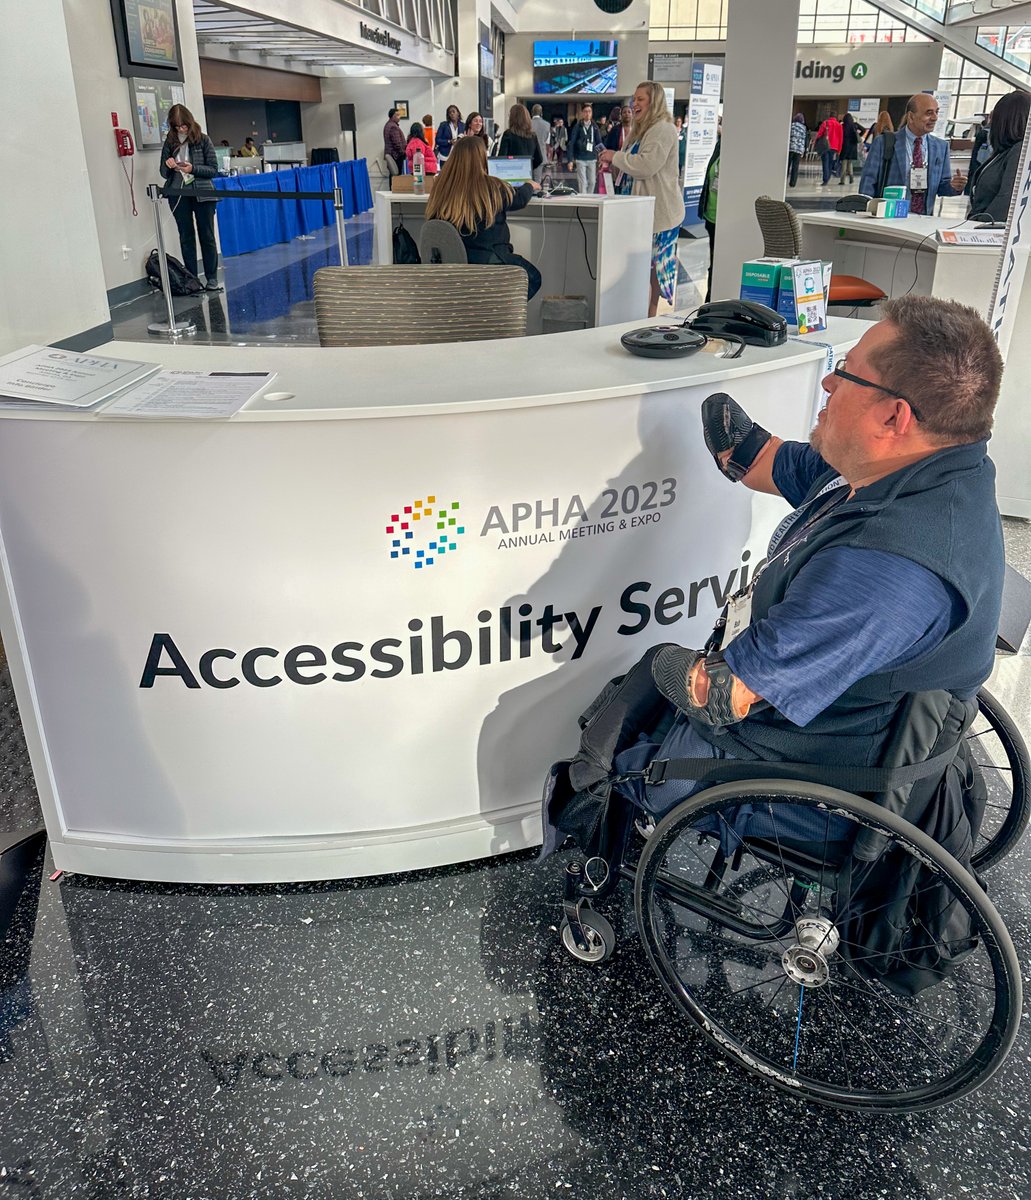 Our Section continues to prioritize #Accessibility & #Inclusion. This year at the Annual Meeting, the accessibility desk not at table height & different heights of the section booths further highlights disparity for disabled people. RT! #Abelism @PublicHealth @APHAAnnualMtg